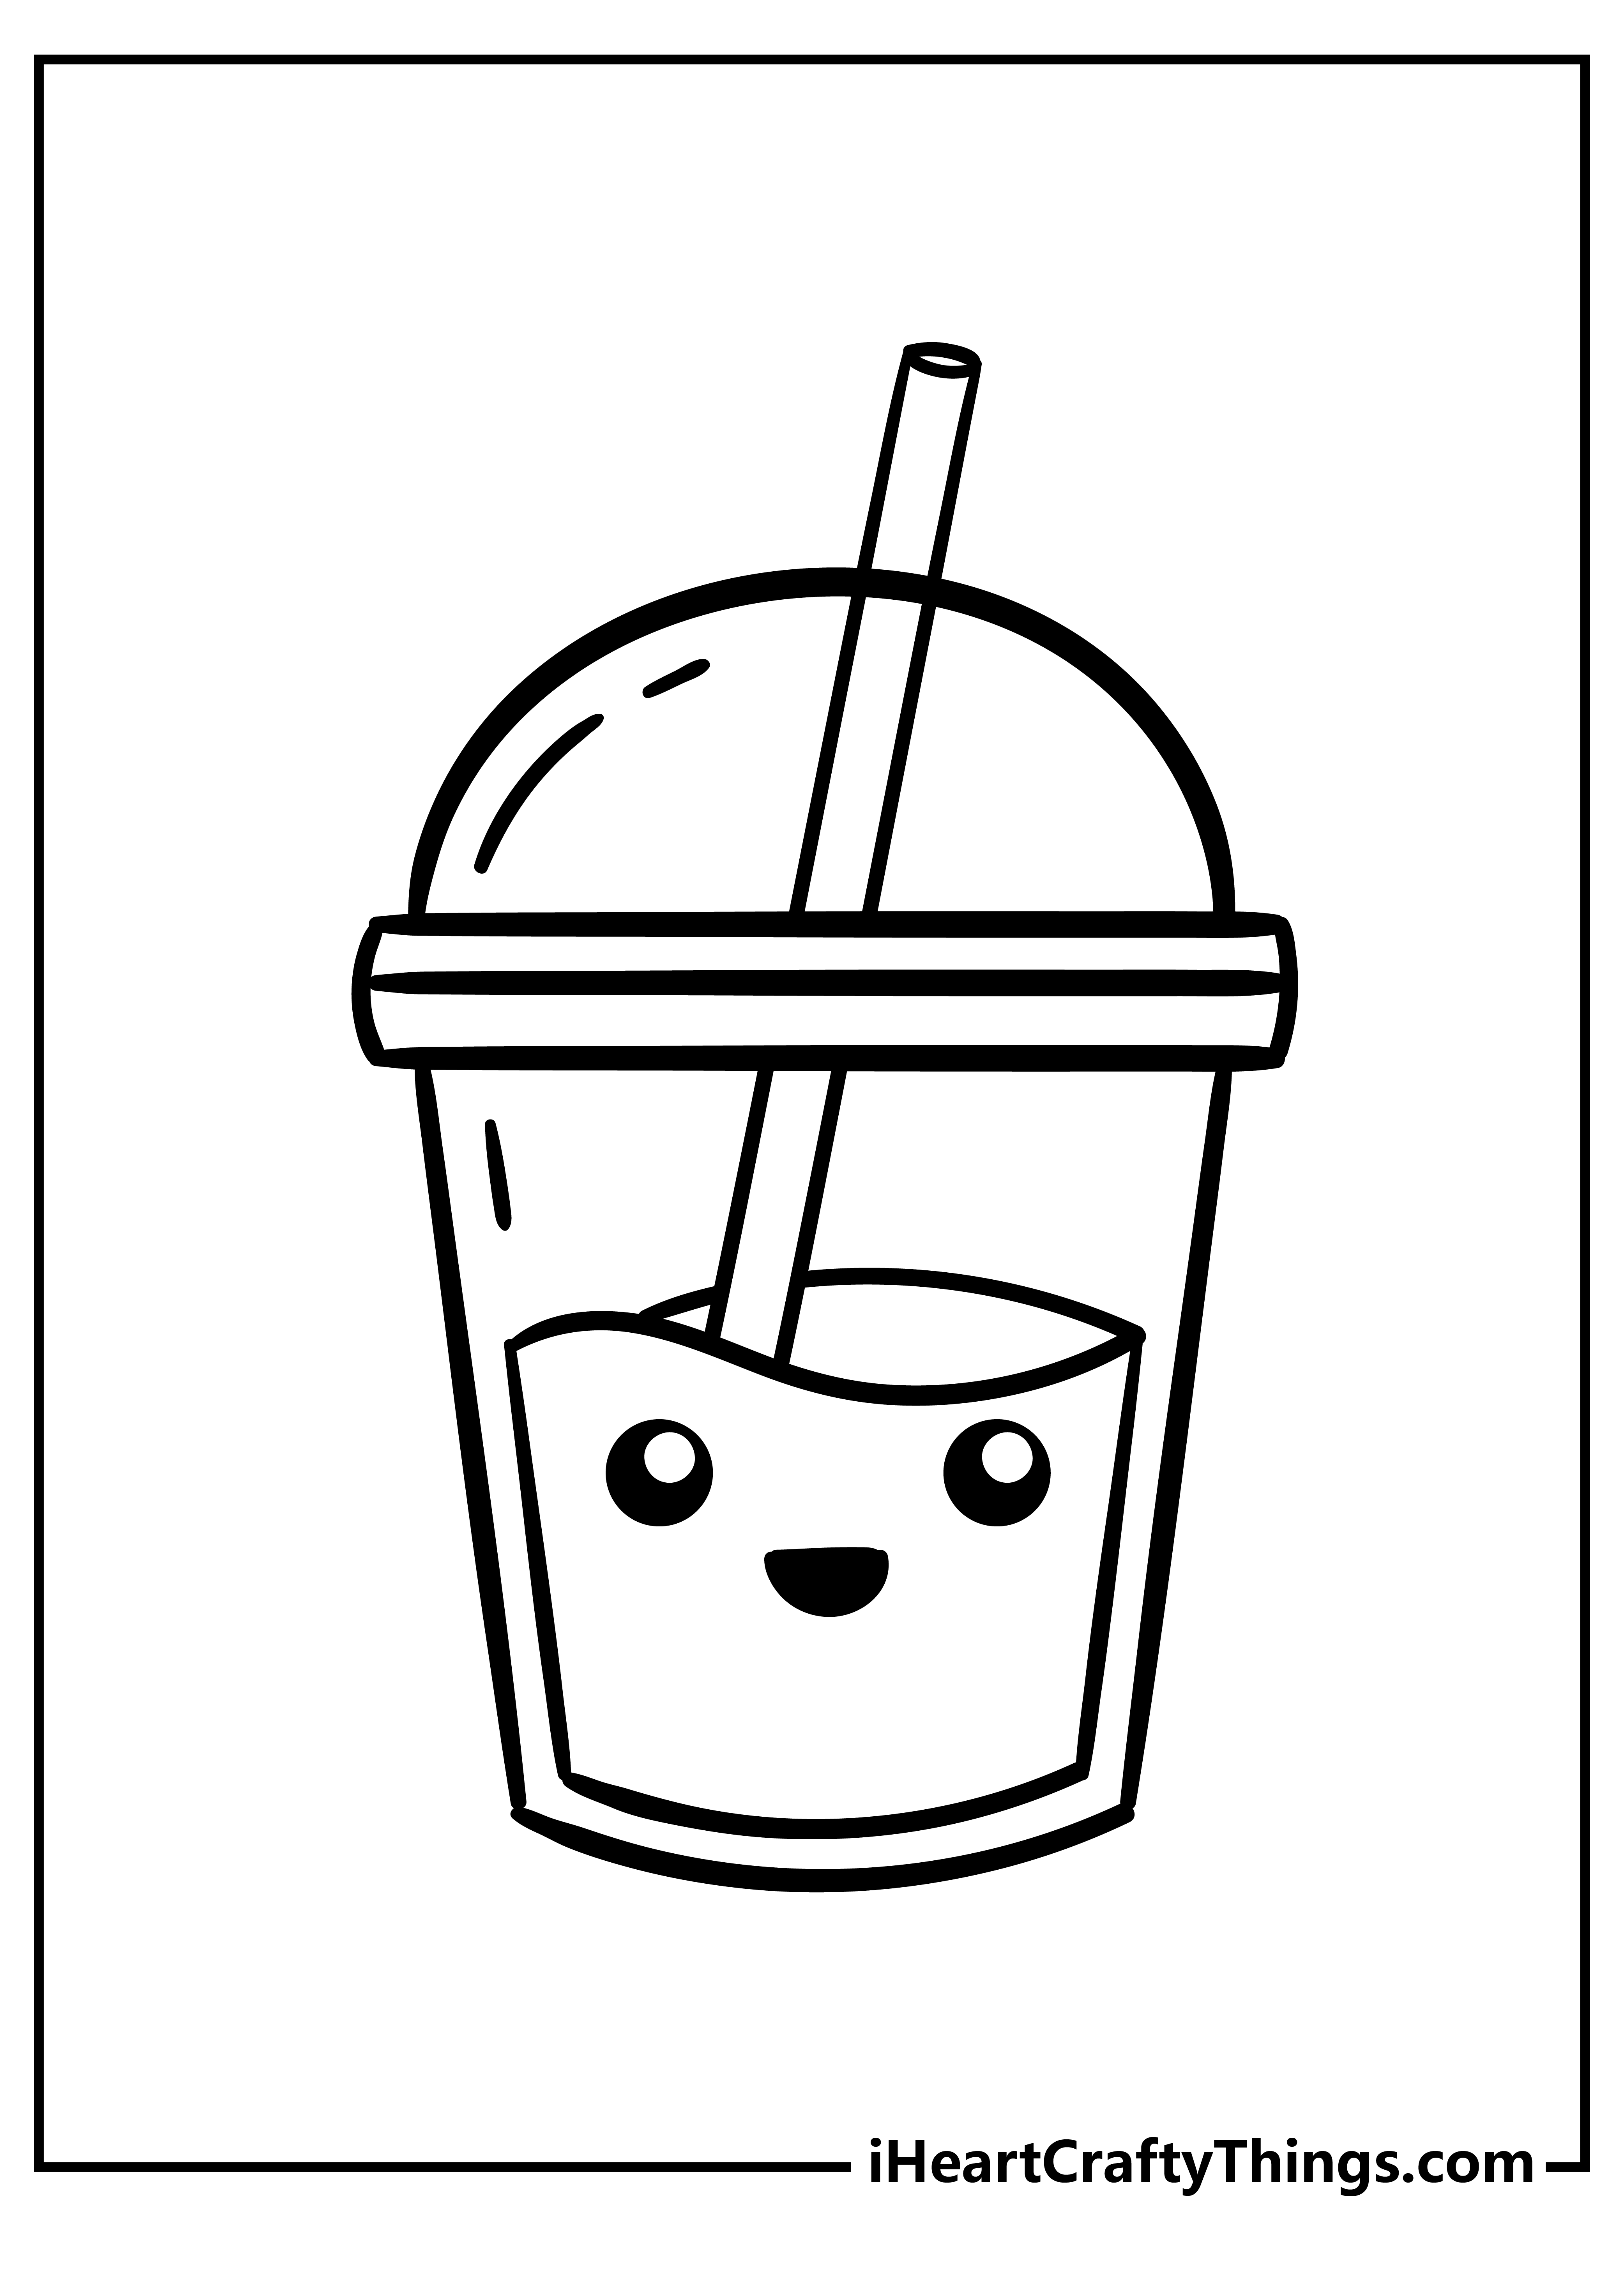 Cute Food Coloring Sheet for children free download